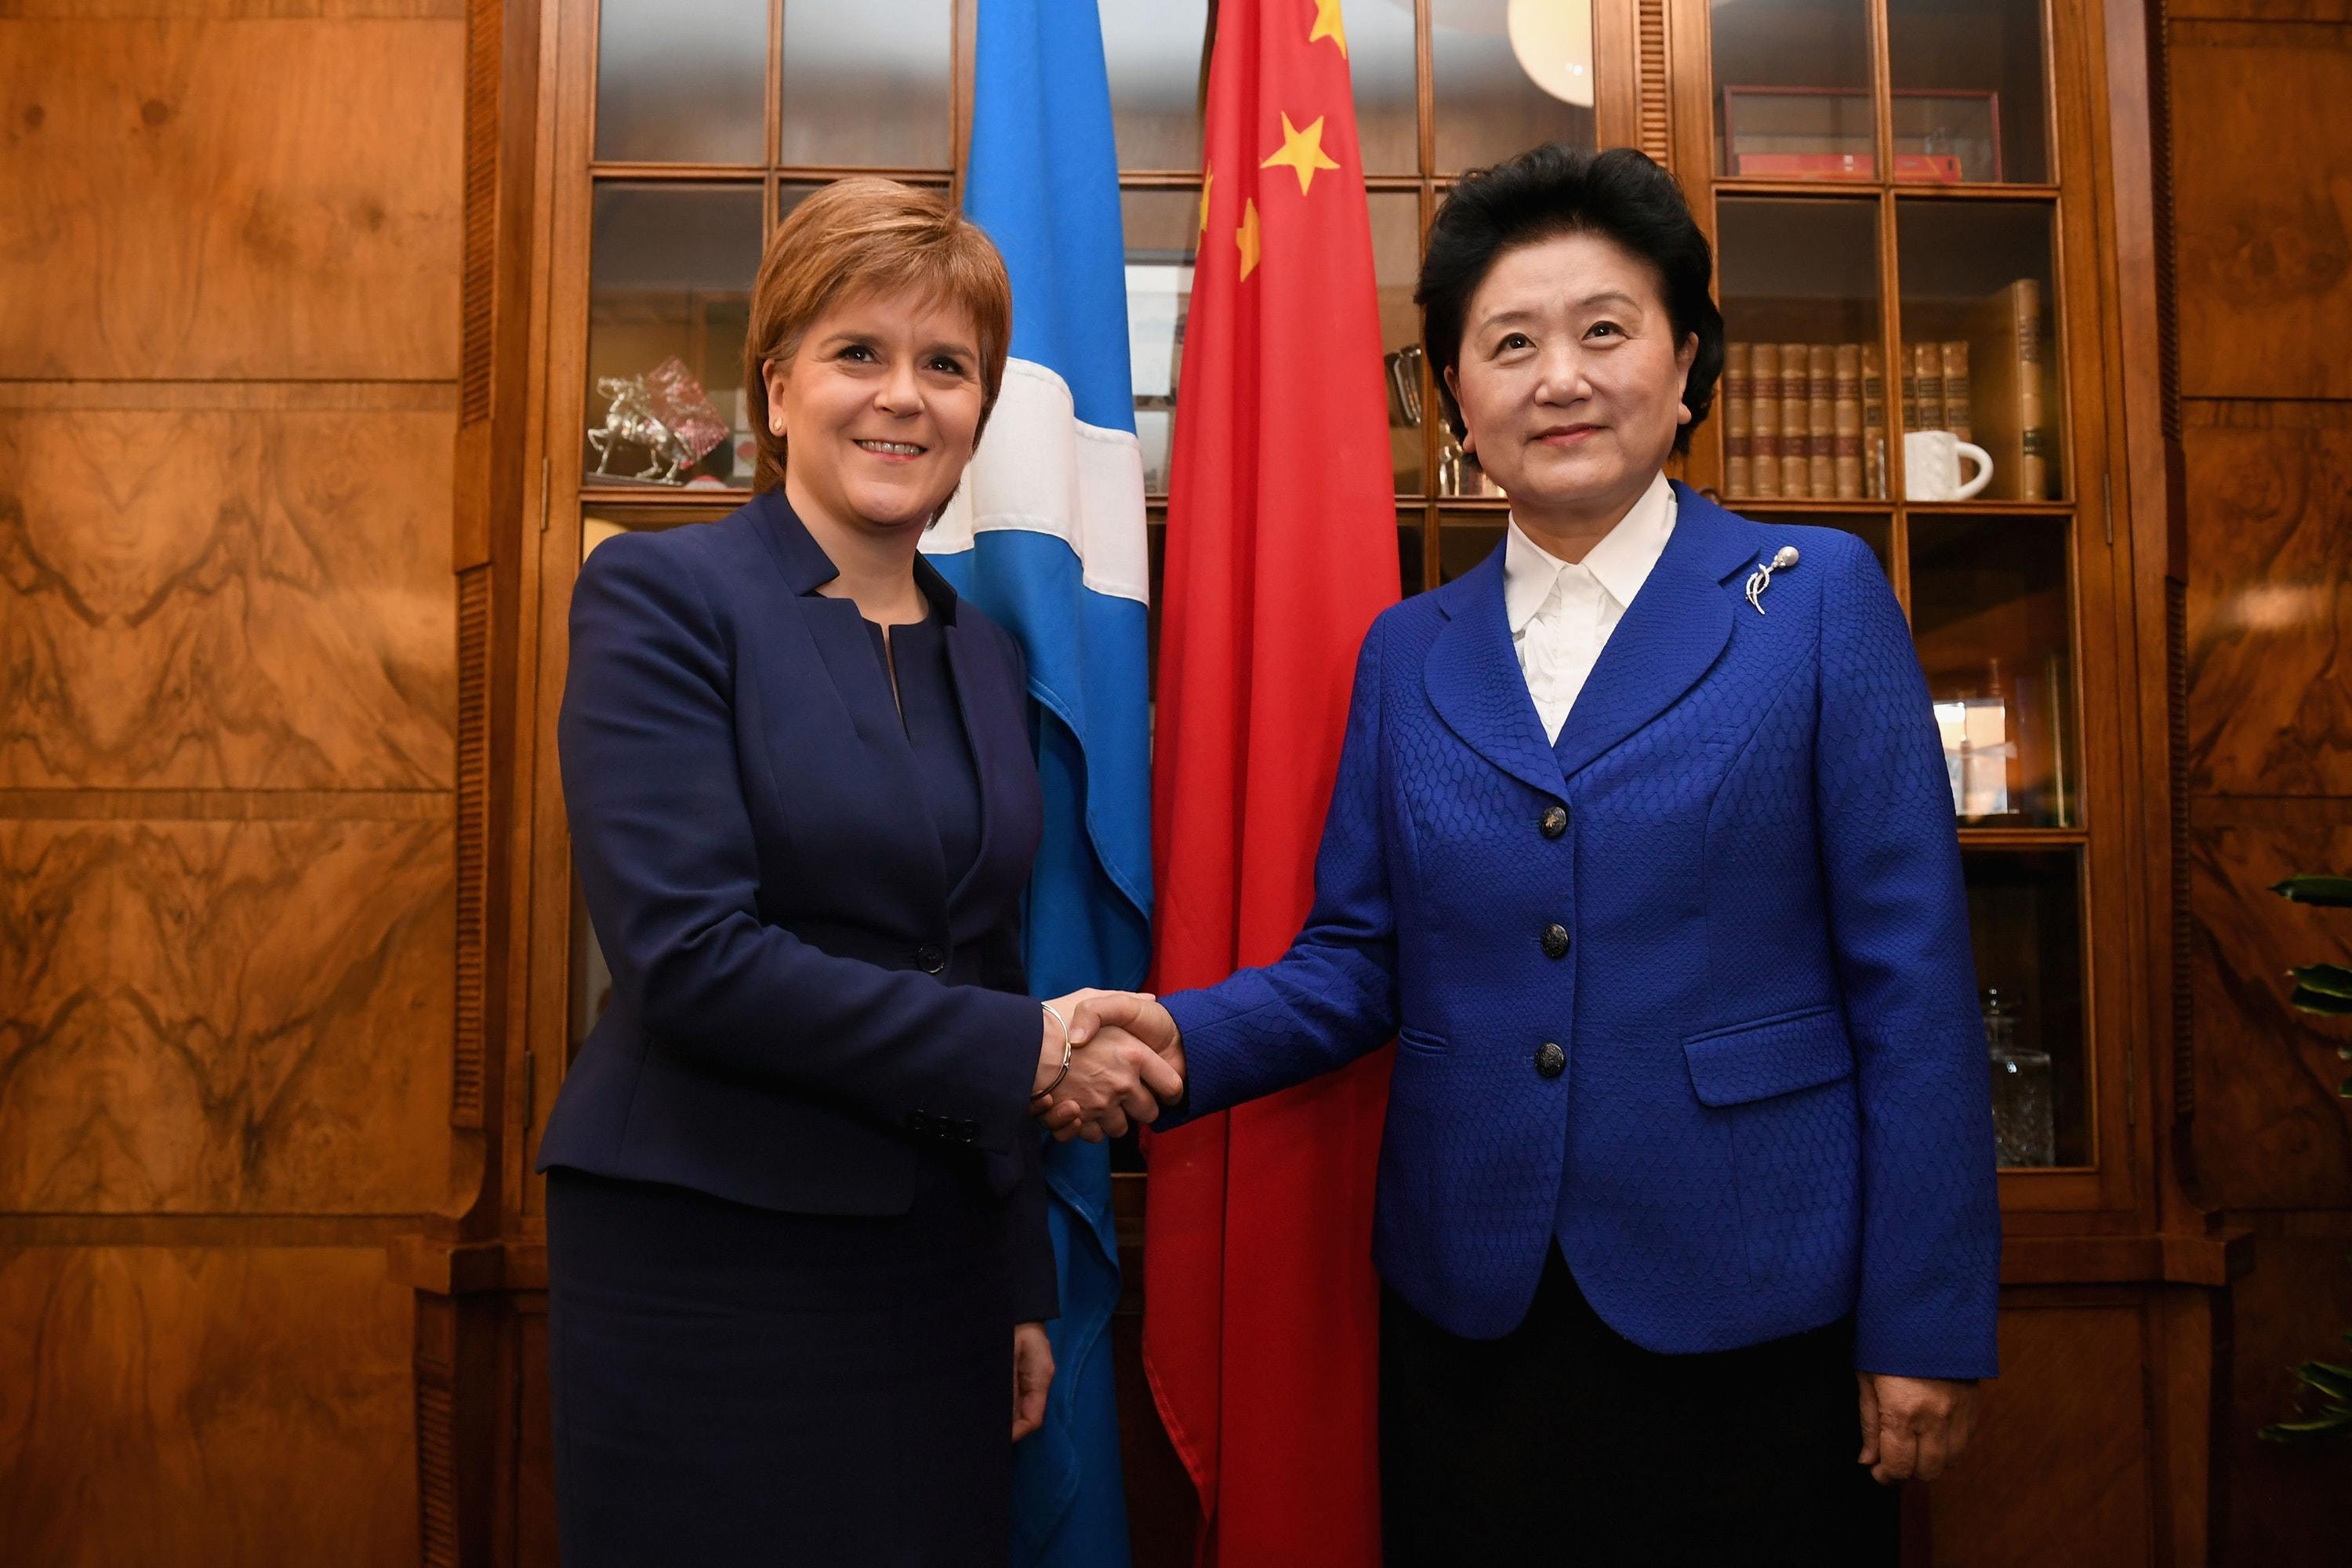 First Minister Nicola Sturgeon promised to raise human rights on China visit (Jeff Mitchell/PA)